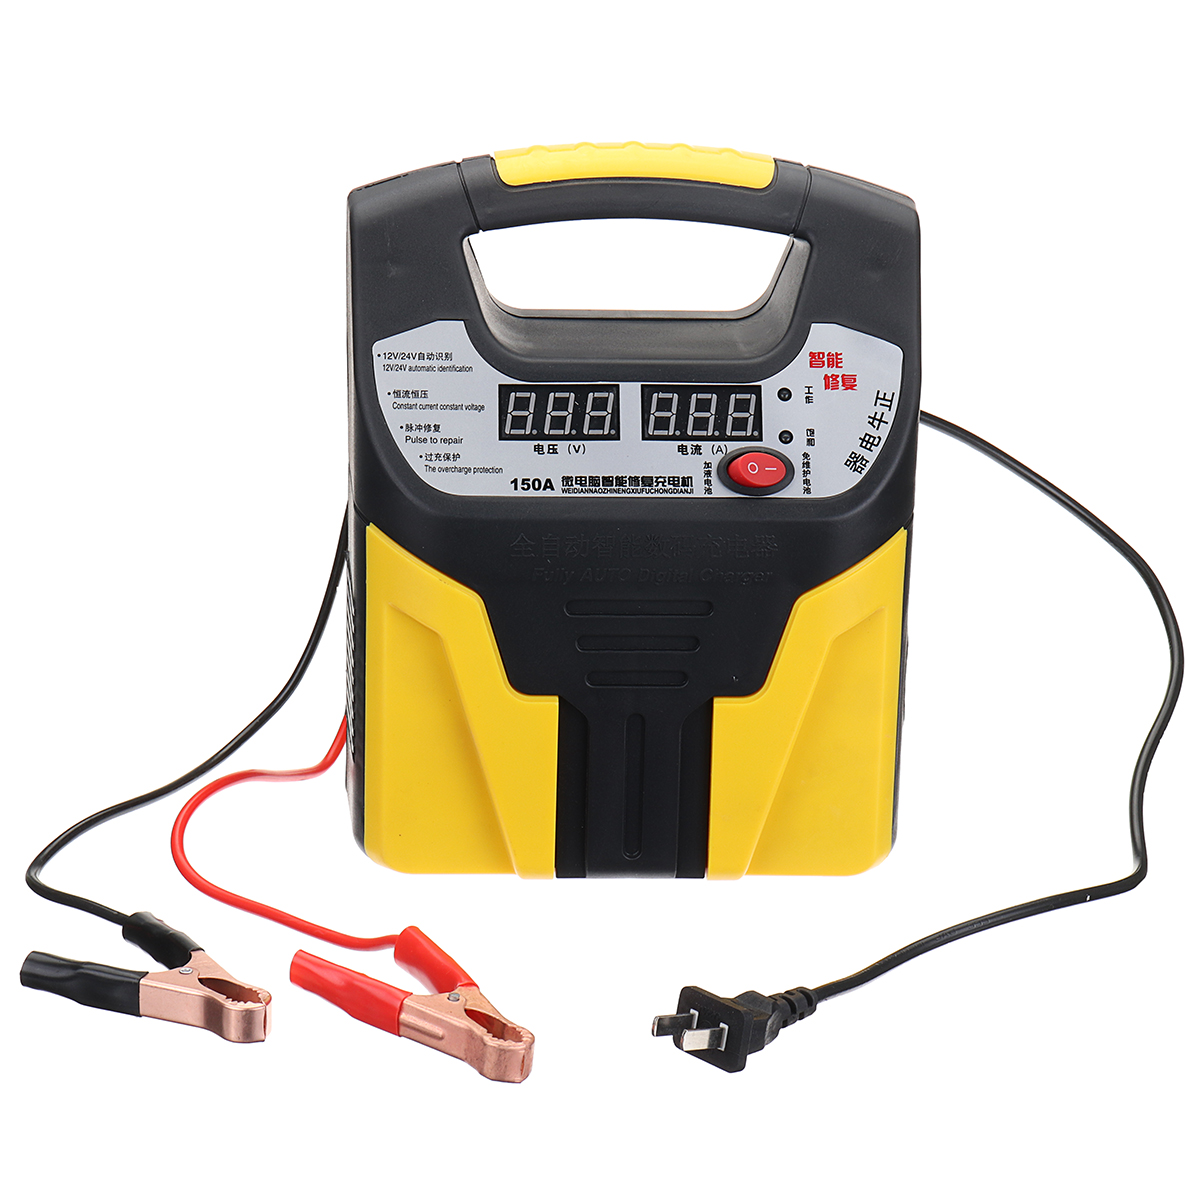 

110V 12V/24V Smart Auto Car Battery Charger LCD display Silent Pulse Repair Jump Starter Booster Eightfold Safety Protec